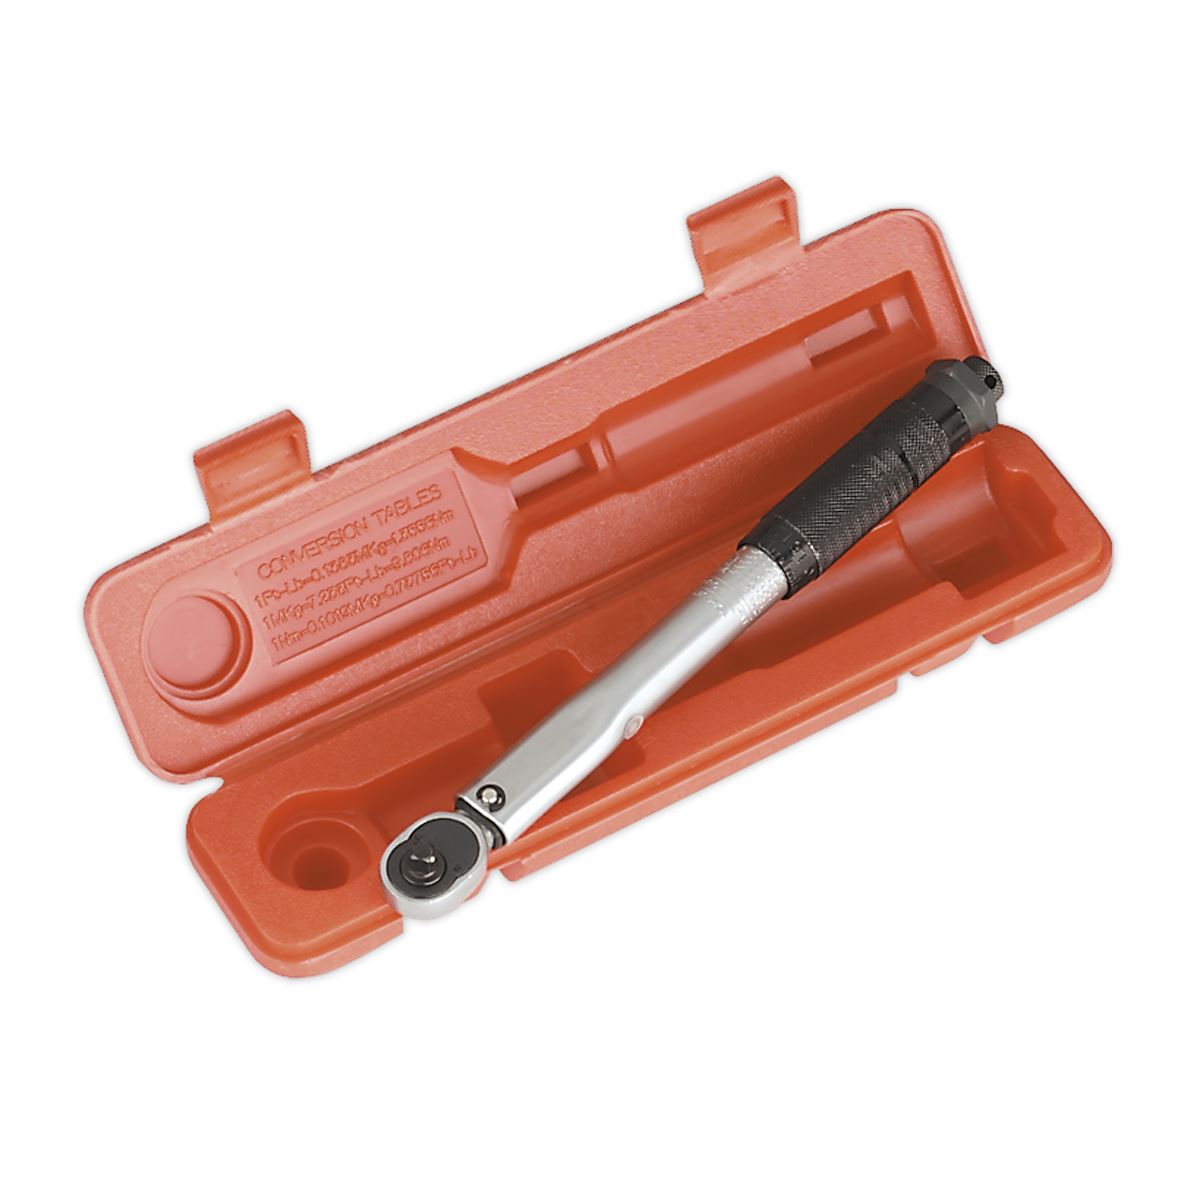 Sealey Premier Torque Wrench Micrometer Style 1/4"Sq Drive 5-25Nm(44-221lb.in) - Calibrated